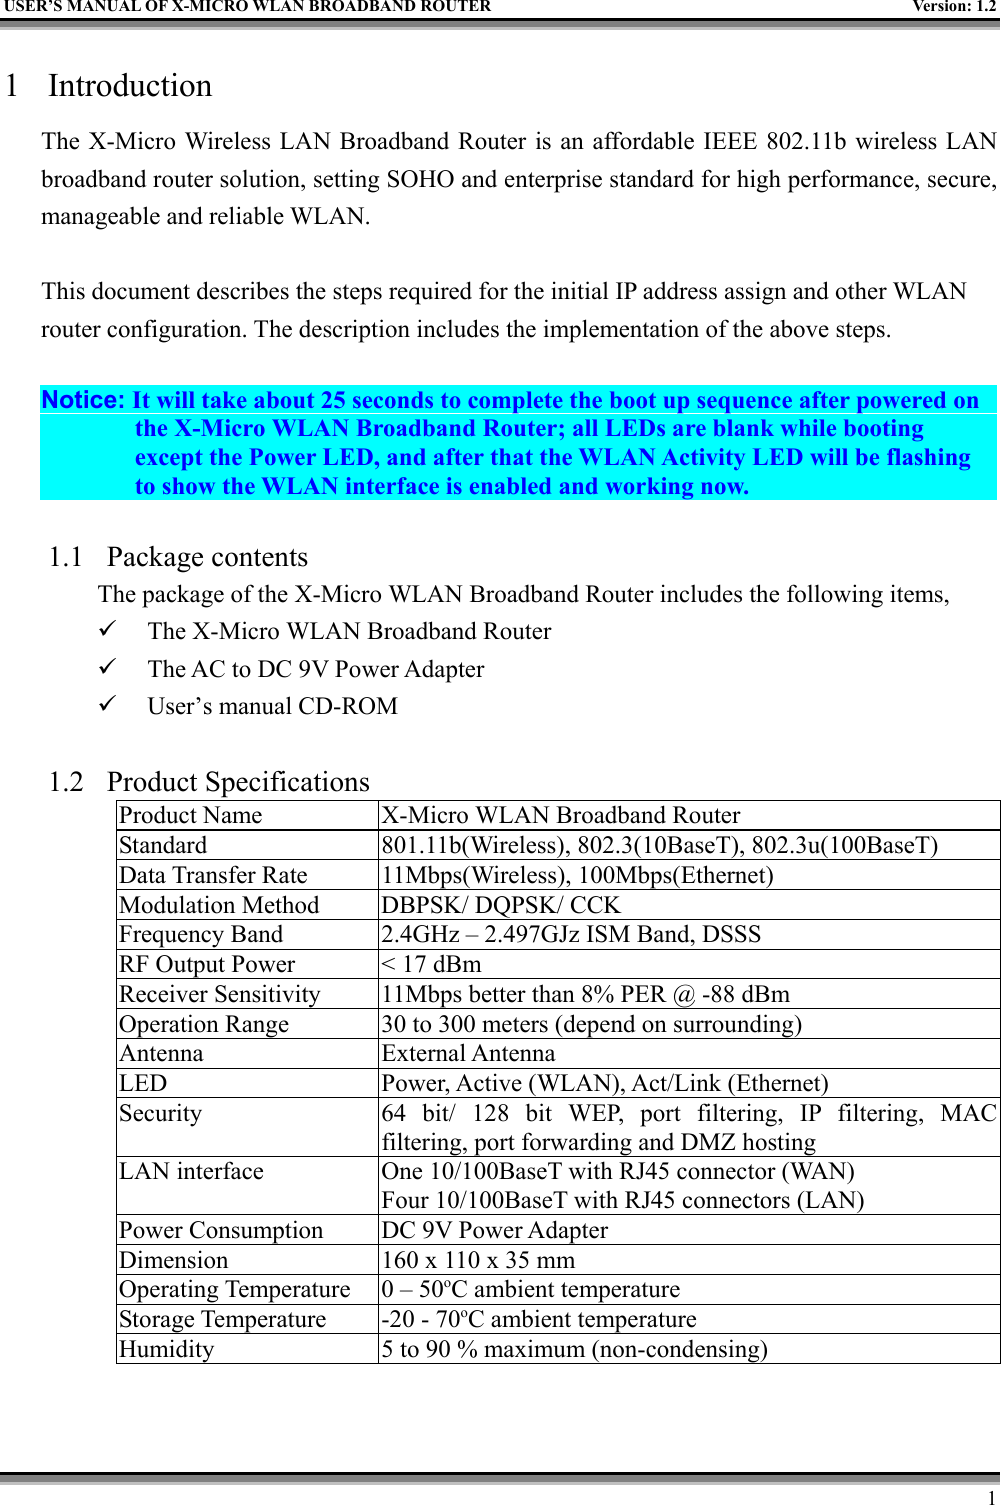 USER’S MANUAL OF X-MICRO WLAN BROADBAND ROUTER Version: 1.211 IntroductionThe X-Micro Wireless LAN Broadband Router is an affordable IEEE 802.11b wireless LANbroadband router solution, setting SOHO and enterprise standard for high performance, secure,manageable and reliable WLAN.This document describes the steps required for the initial IP address assign and other WLANrouter configuration. The description includes the implementation of the above steps.Notice: It will take about 25 seconds to complete the boot up sequence after powered onthe X-Micro WLAN Broadband Router; all LEDs are blank while bootingexcept the Power LED, and after that the WLAN Activity LED will be flashingto show the WLAN interface is enabled and working now.1.1 Package contentsThe package of the X-Micro WLAN Broadband Router includes the following items,9 The X-Micro WLAN Broadband Router9 The AC to DC 9V Power Adapter9 User’s manual CD-ROM1.2 Product SpecificationsProduct Name X-Micro WLAN Broadband RouterStandard 801.11b(Wireless), 802.3(10BaseT), 802.3u(100BaseT)Data Transfer Rate 11Mbps(Wireless), 100Mbps(Ethernet)Modulation Method DBPSK/ DQPSK/ CCKFrequency Band 2.4GHz – 2.497GJz ISM Band, DSSSRF Output Power &lt; 17 dBmReceiver Sensitivity 11Mbps better than 8% PER @ -88 dBmOperation Range 30 to 300 meters (depend on surrounding)Antenna External AntennaLED Power, Active (WLAN), Act/Link (Ethernet)Security 64 bit/ 128 bit WEP, port filtering, IP filtering, MACfiltering, port forwarding and DMZ hostingLAN interface One 10/100BaseT with RJ45 connector (WAN)Four 10/100BaseT with RJ45 connectors (LAN)Power Consumption DC 9V Power AdapterDimension 160 x 110 x 35 mmOperating Temperature 0 – 50oC ambient temperatureStorage Temperature -20 - 70oC ambient temperatureHumidity 5 to 90 % maximum (non-condensing)